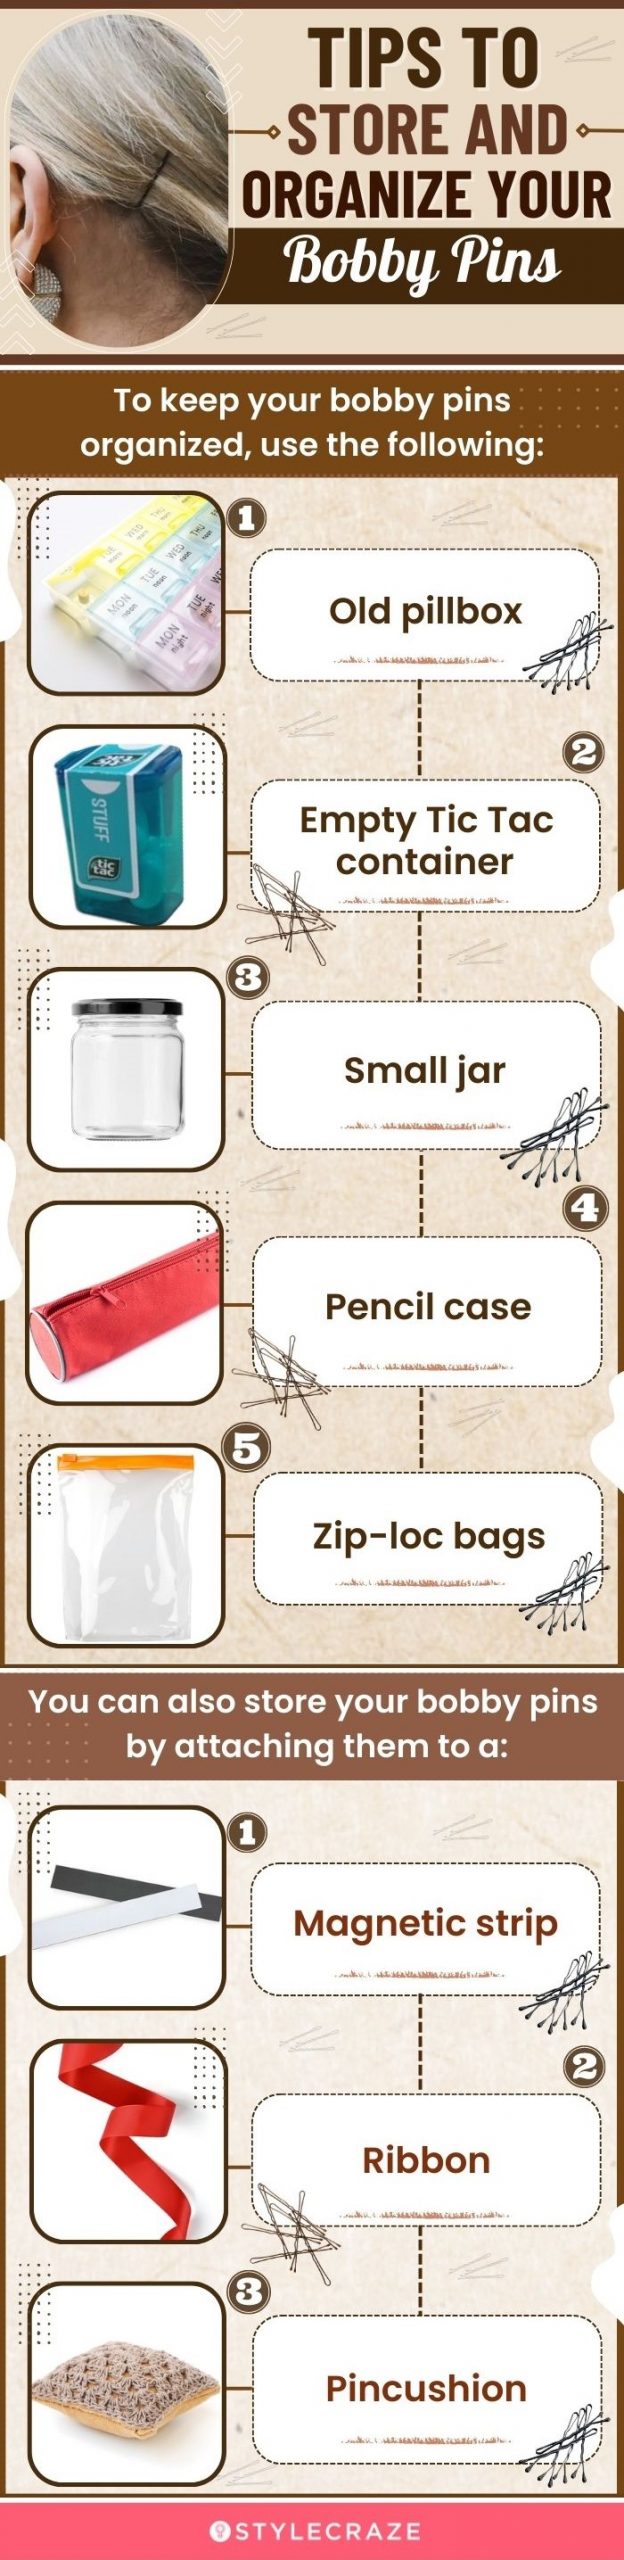 Tips To Store And Organize Your Bobby Pins (infographic)